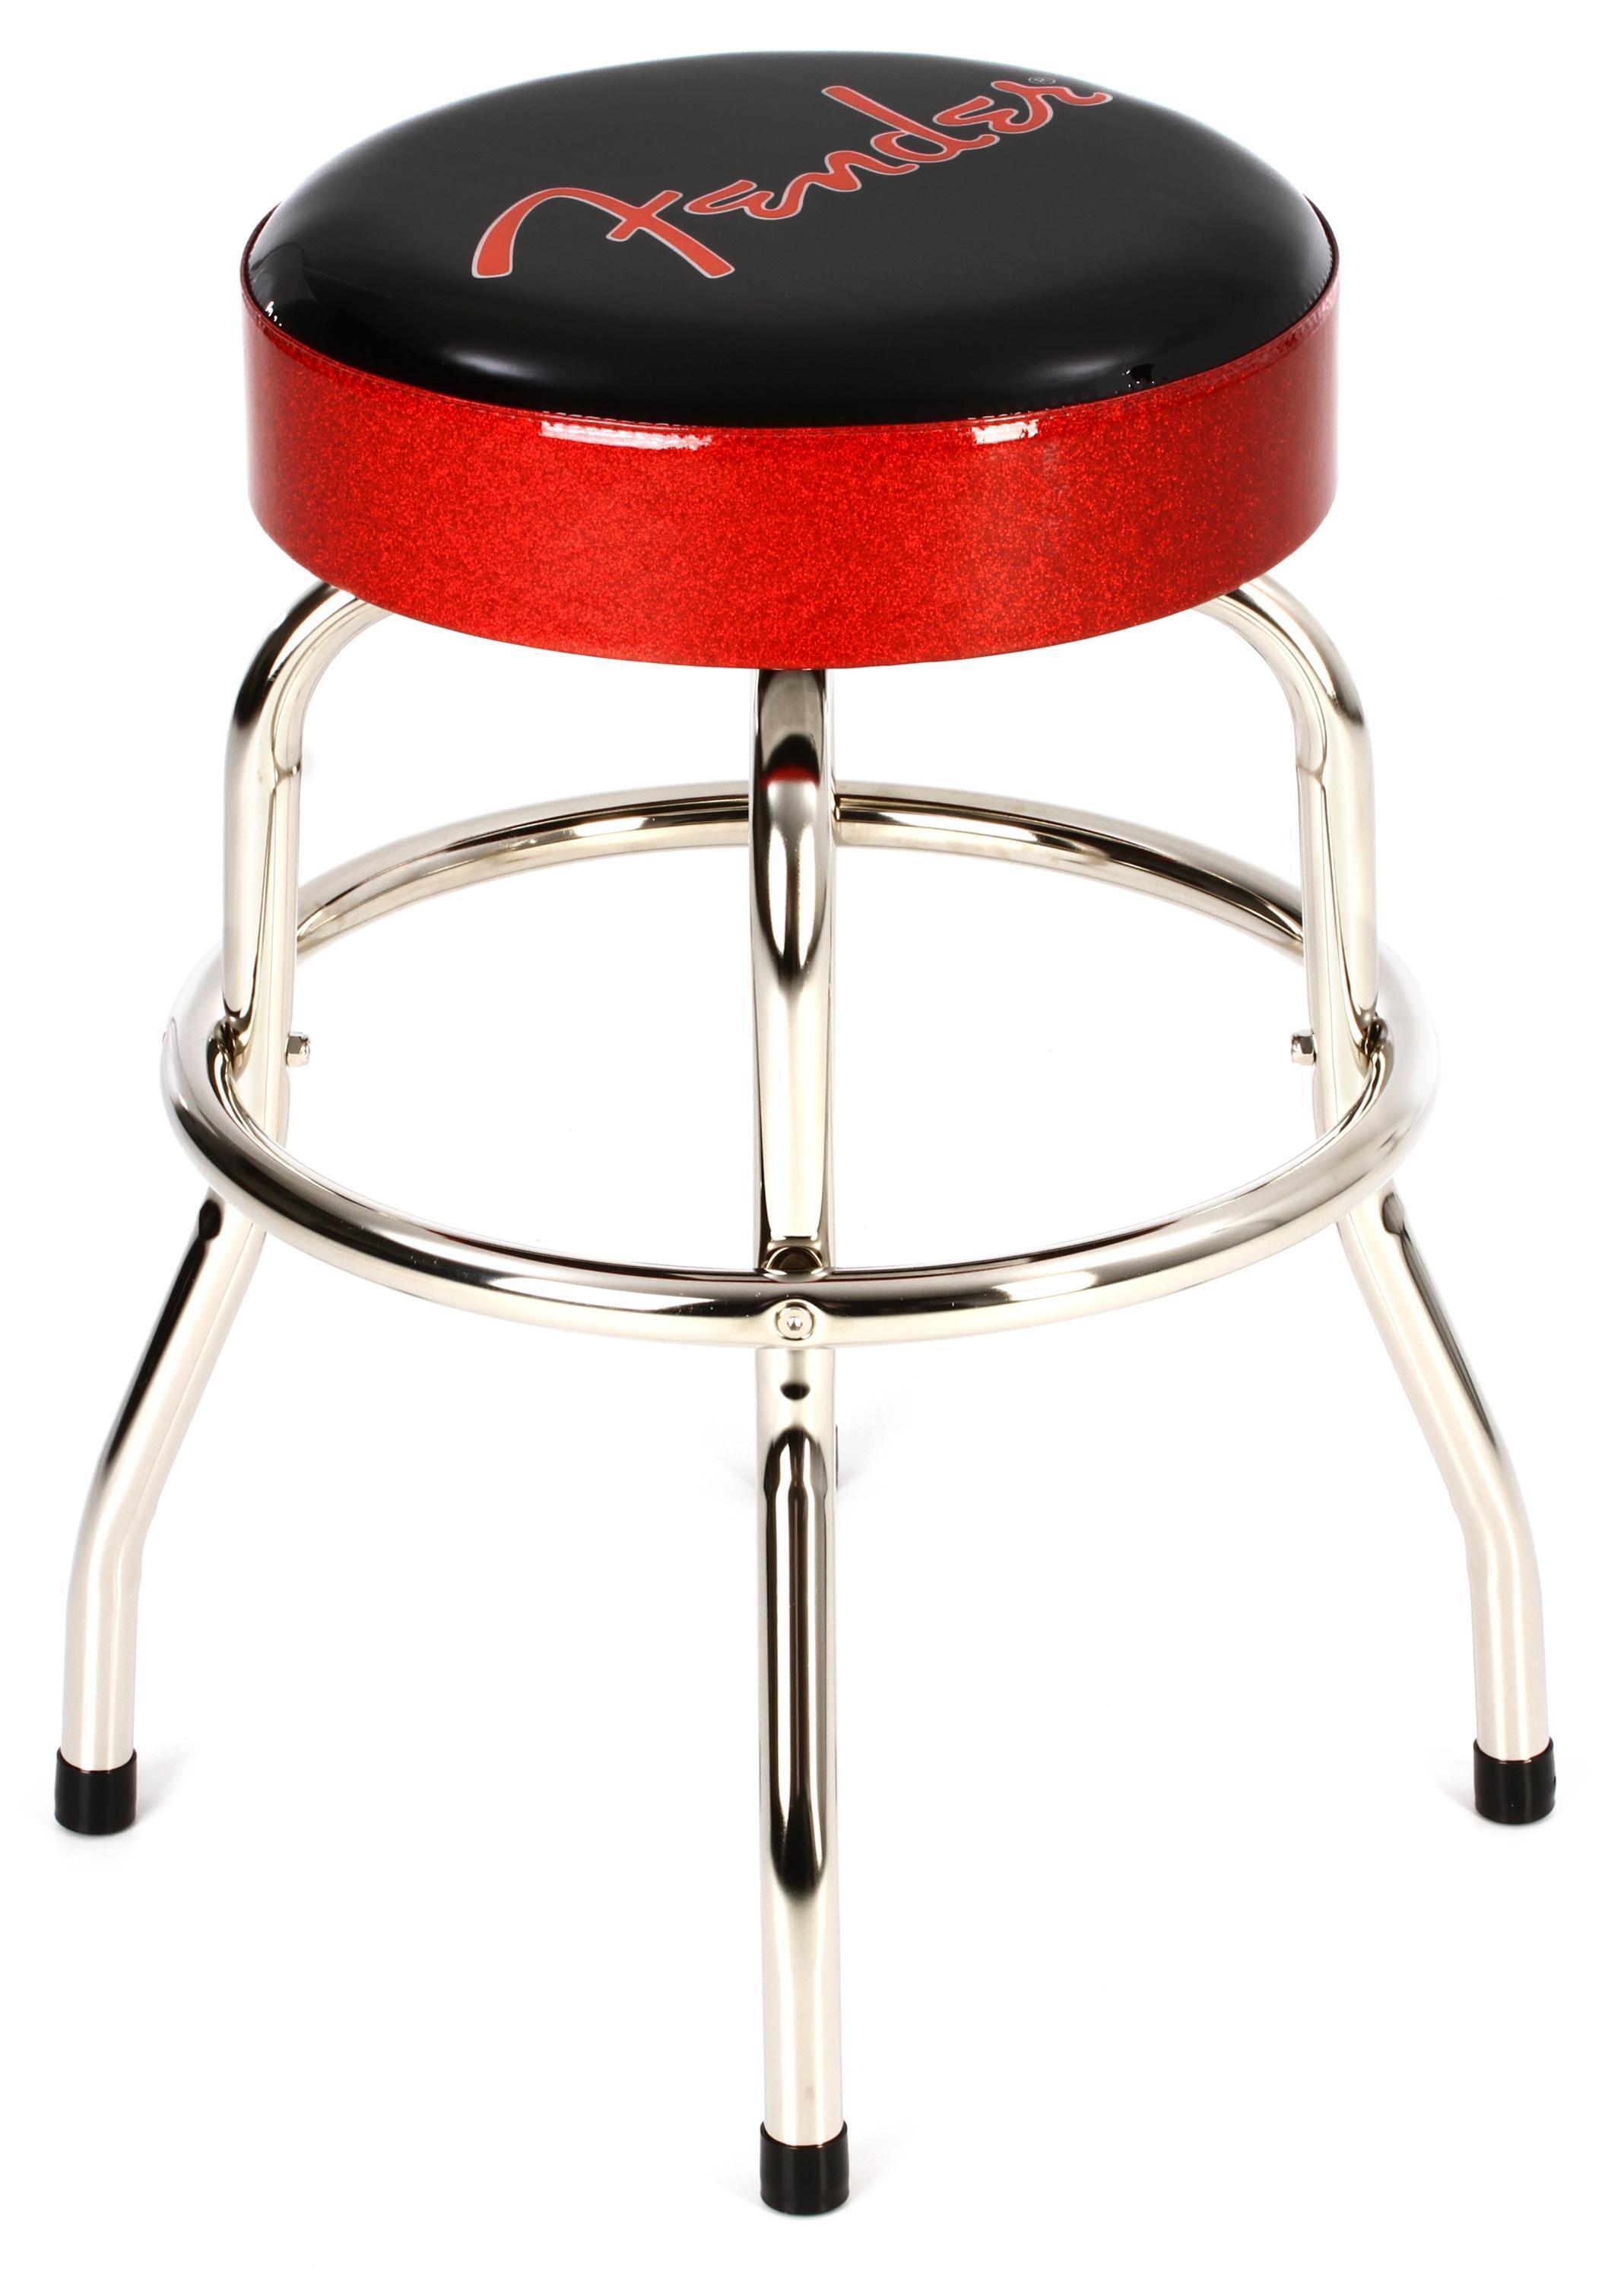 Fender Red and Black Logo Barstool - 24 inch | Sweetwater